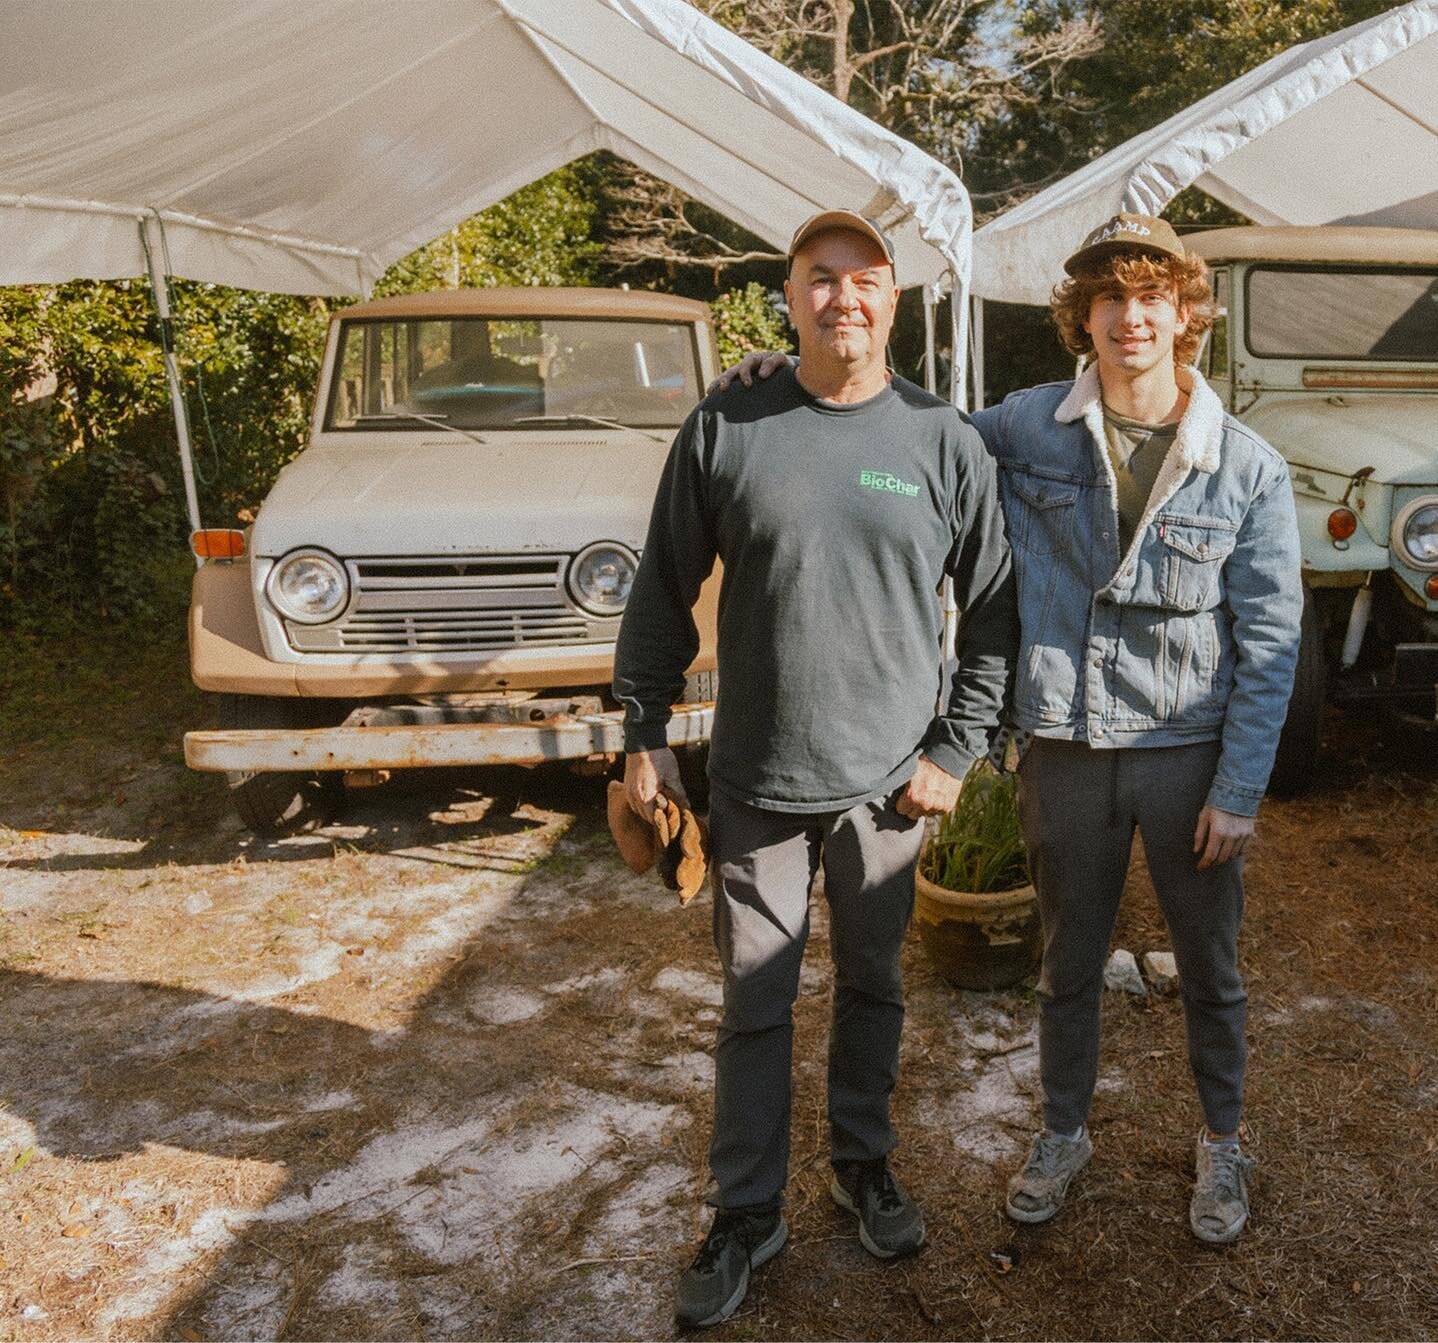 Forgot about these! 😅 A little while ago, I spent some time with @johnathan_ciarrocca, checking out his Land Cruisers that him and his dad restore.